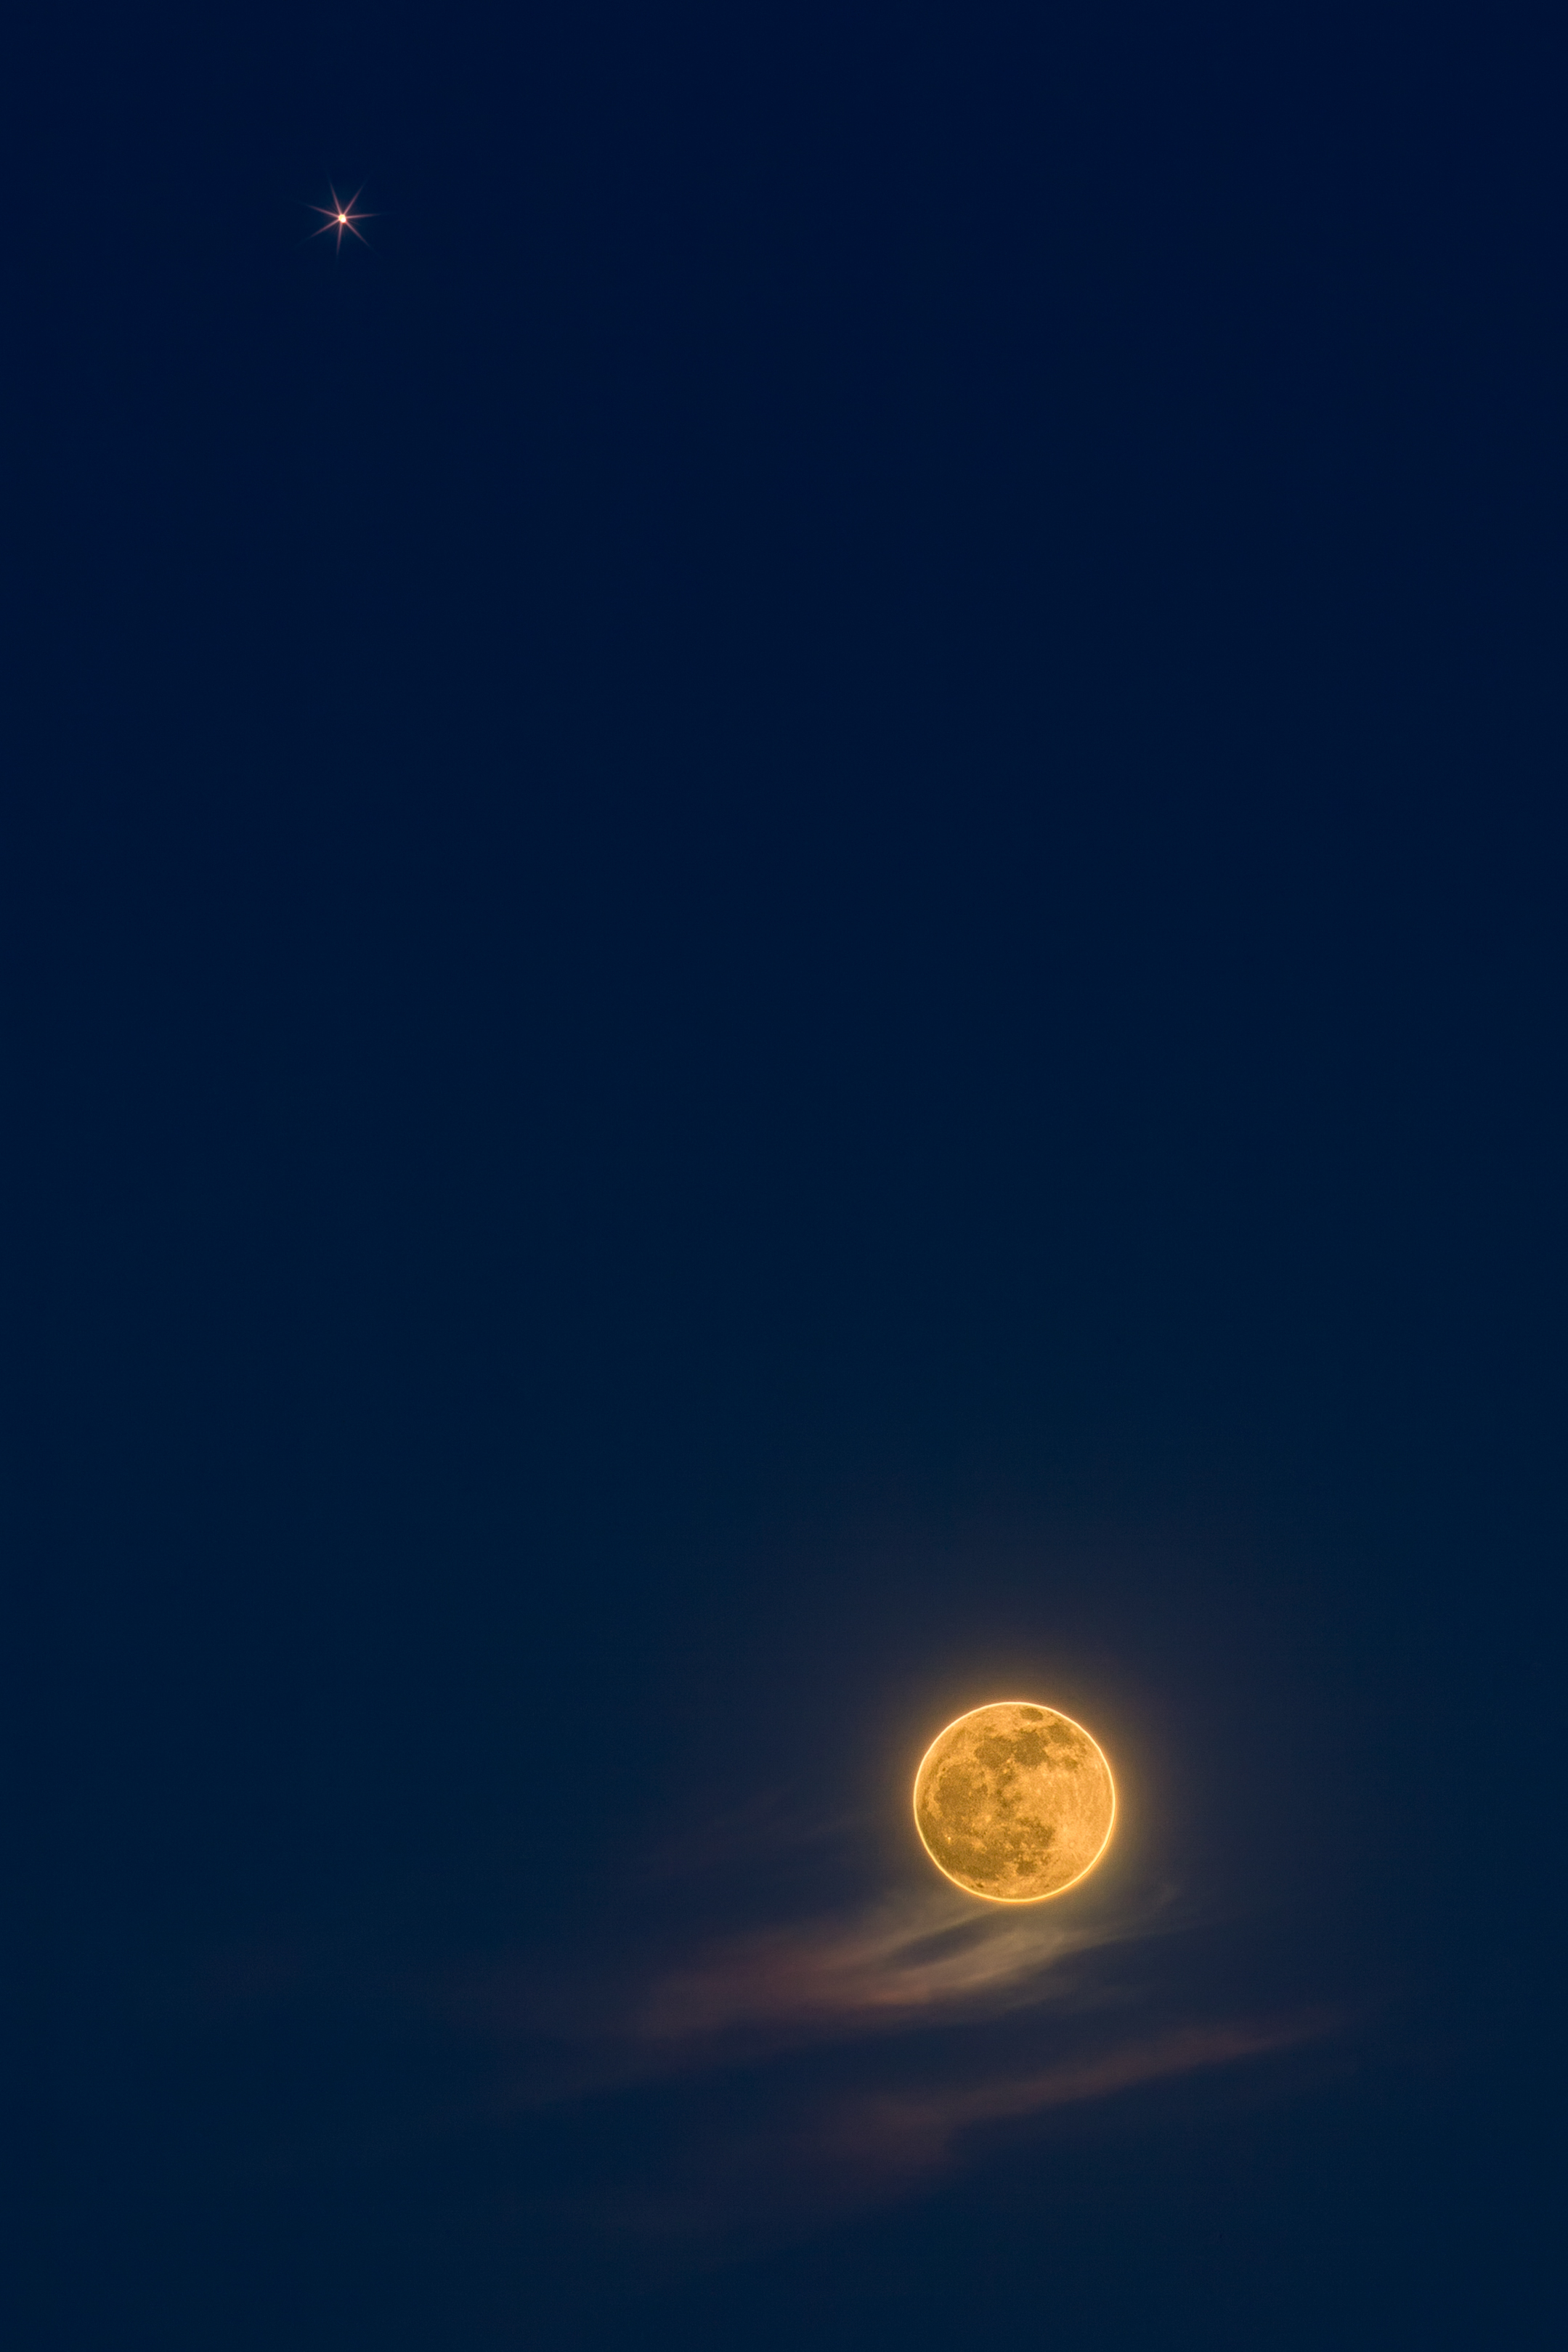 night, universe, moon, sky images